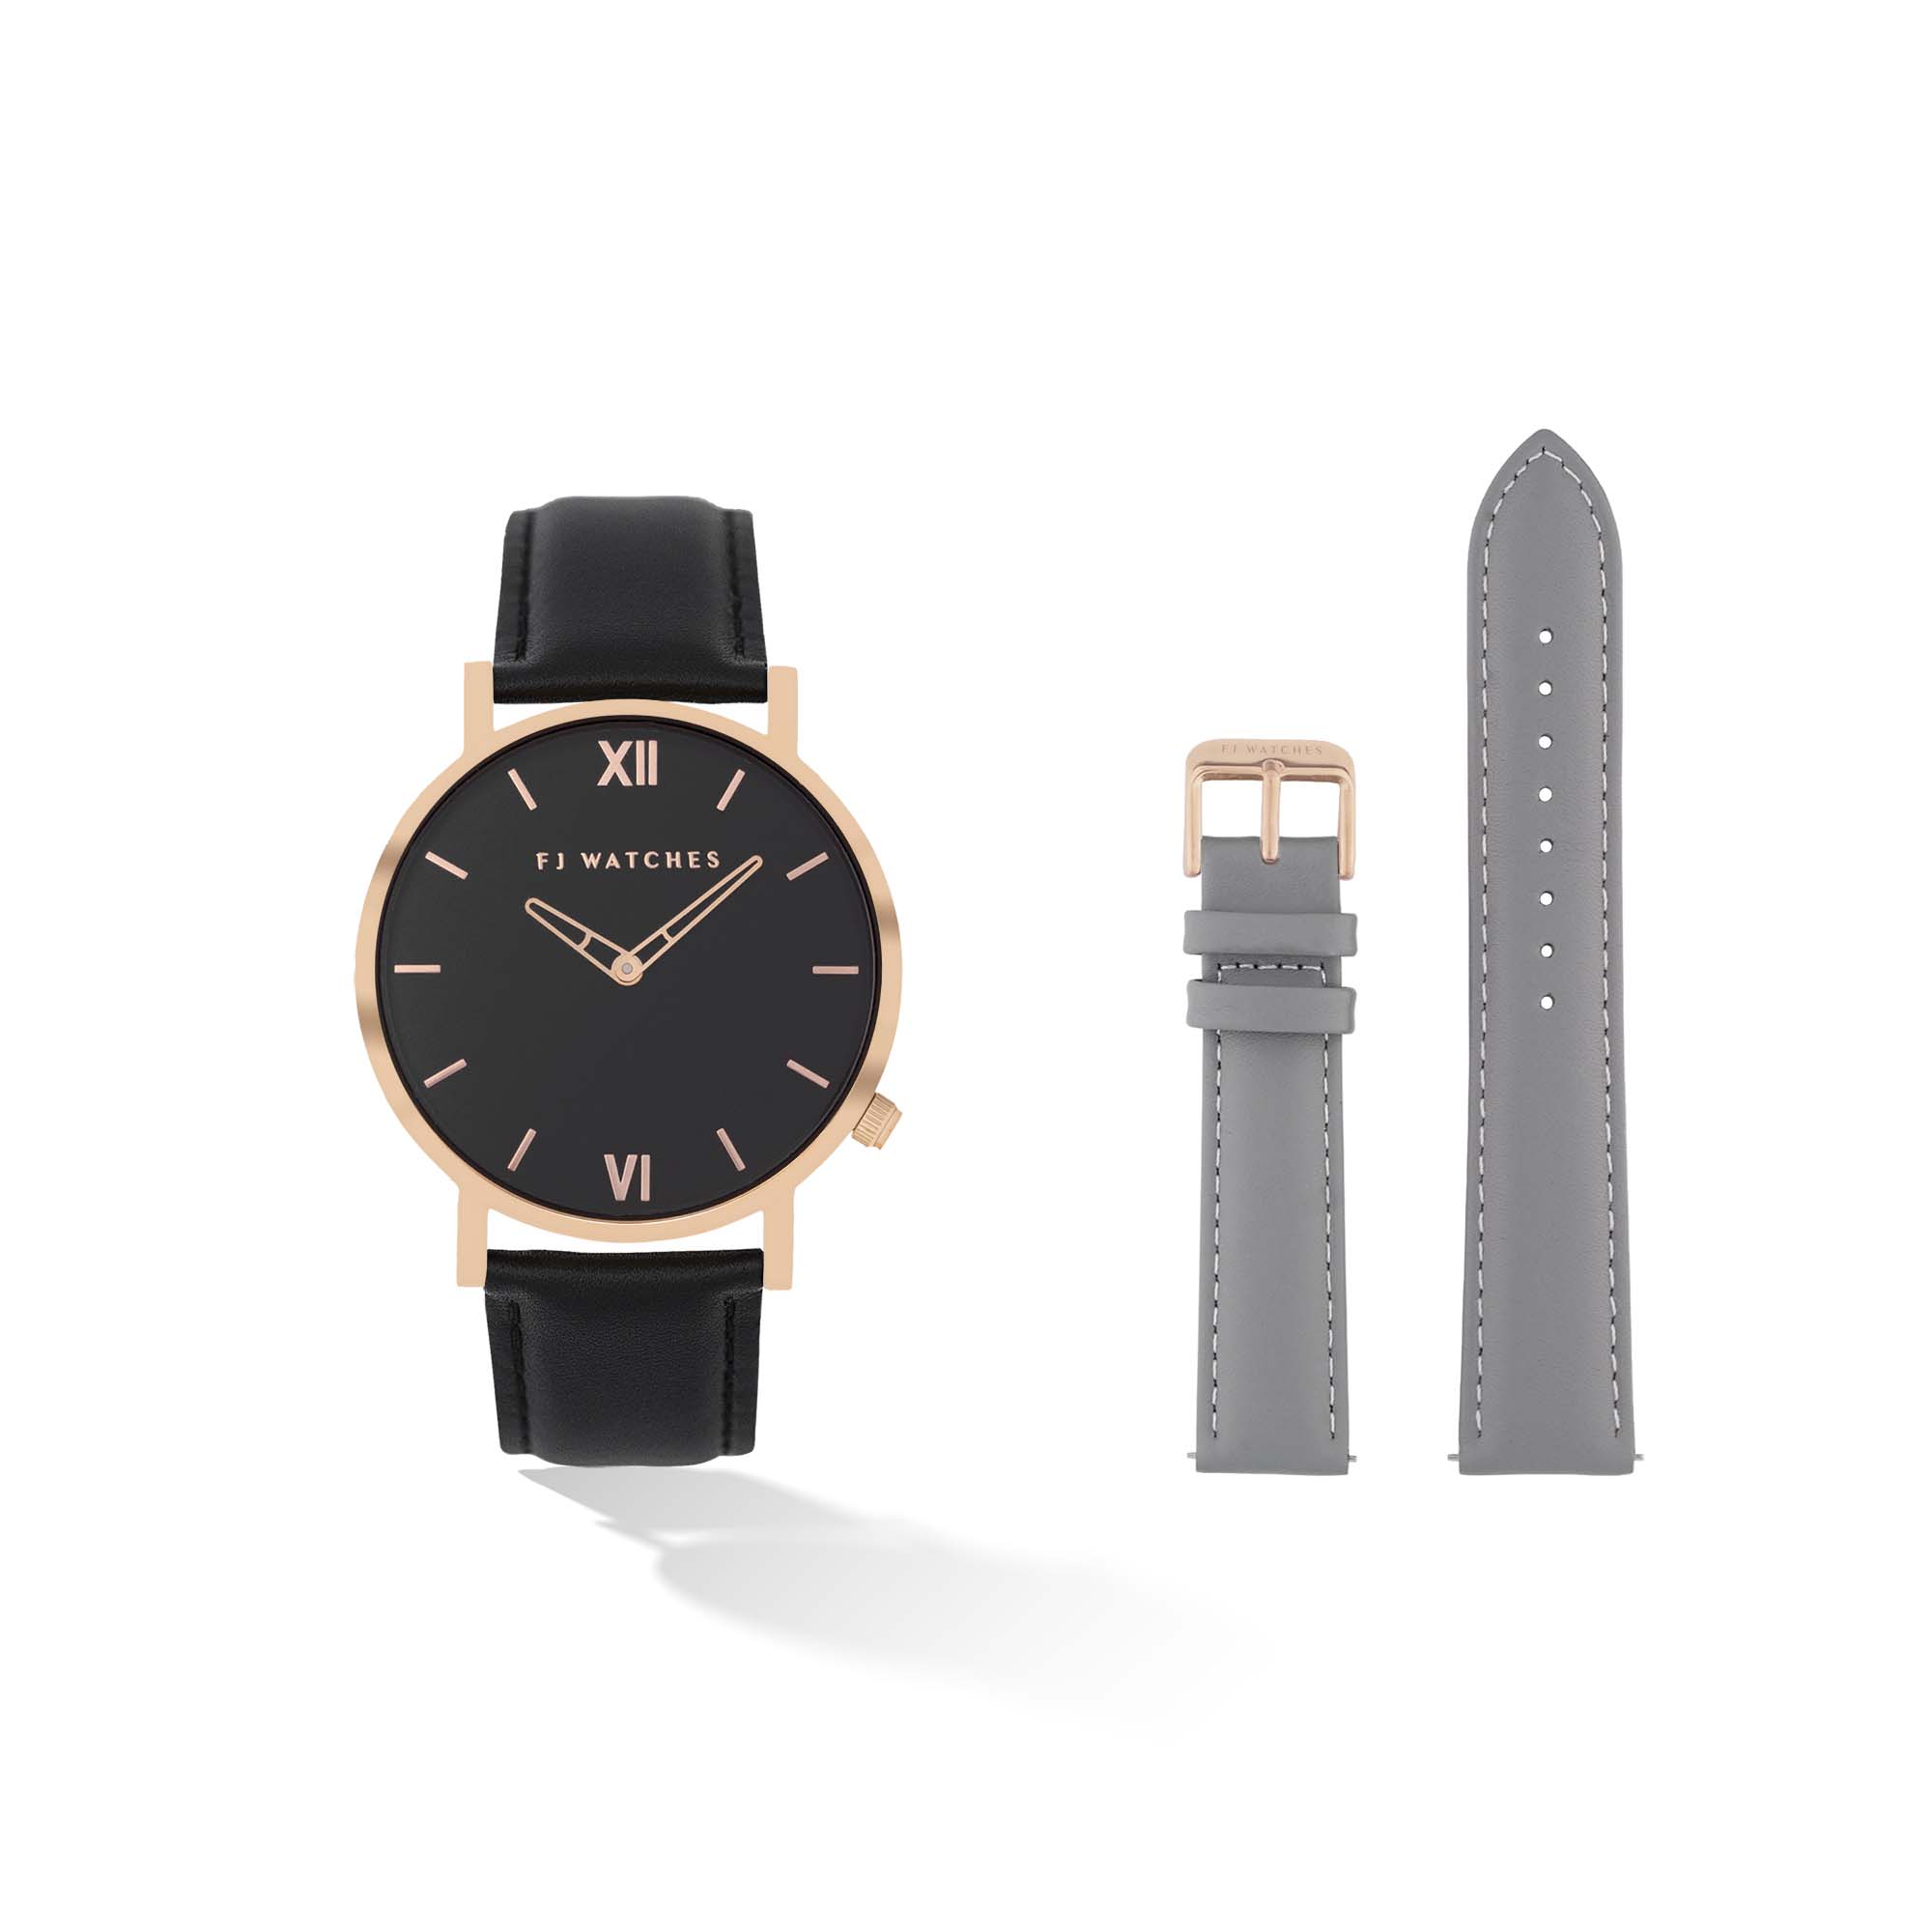 Discover the Golden Moon set, a 42mm men watch from Five Jwlry. Equipped with a minimalist black and rose gold dial. In this special edition, this watch comes with two leathers, one black leather and one gray. The perfect gift!